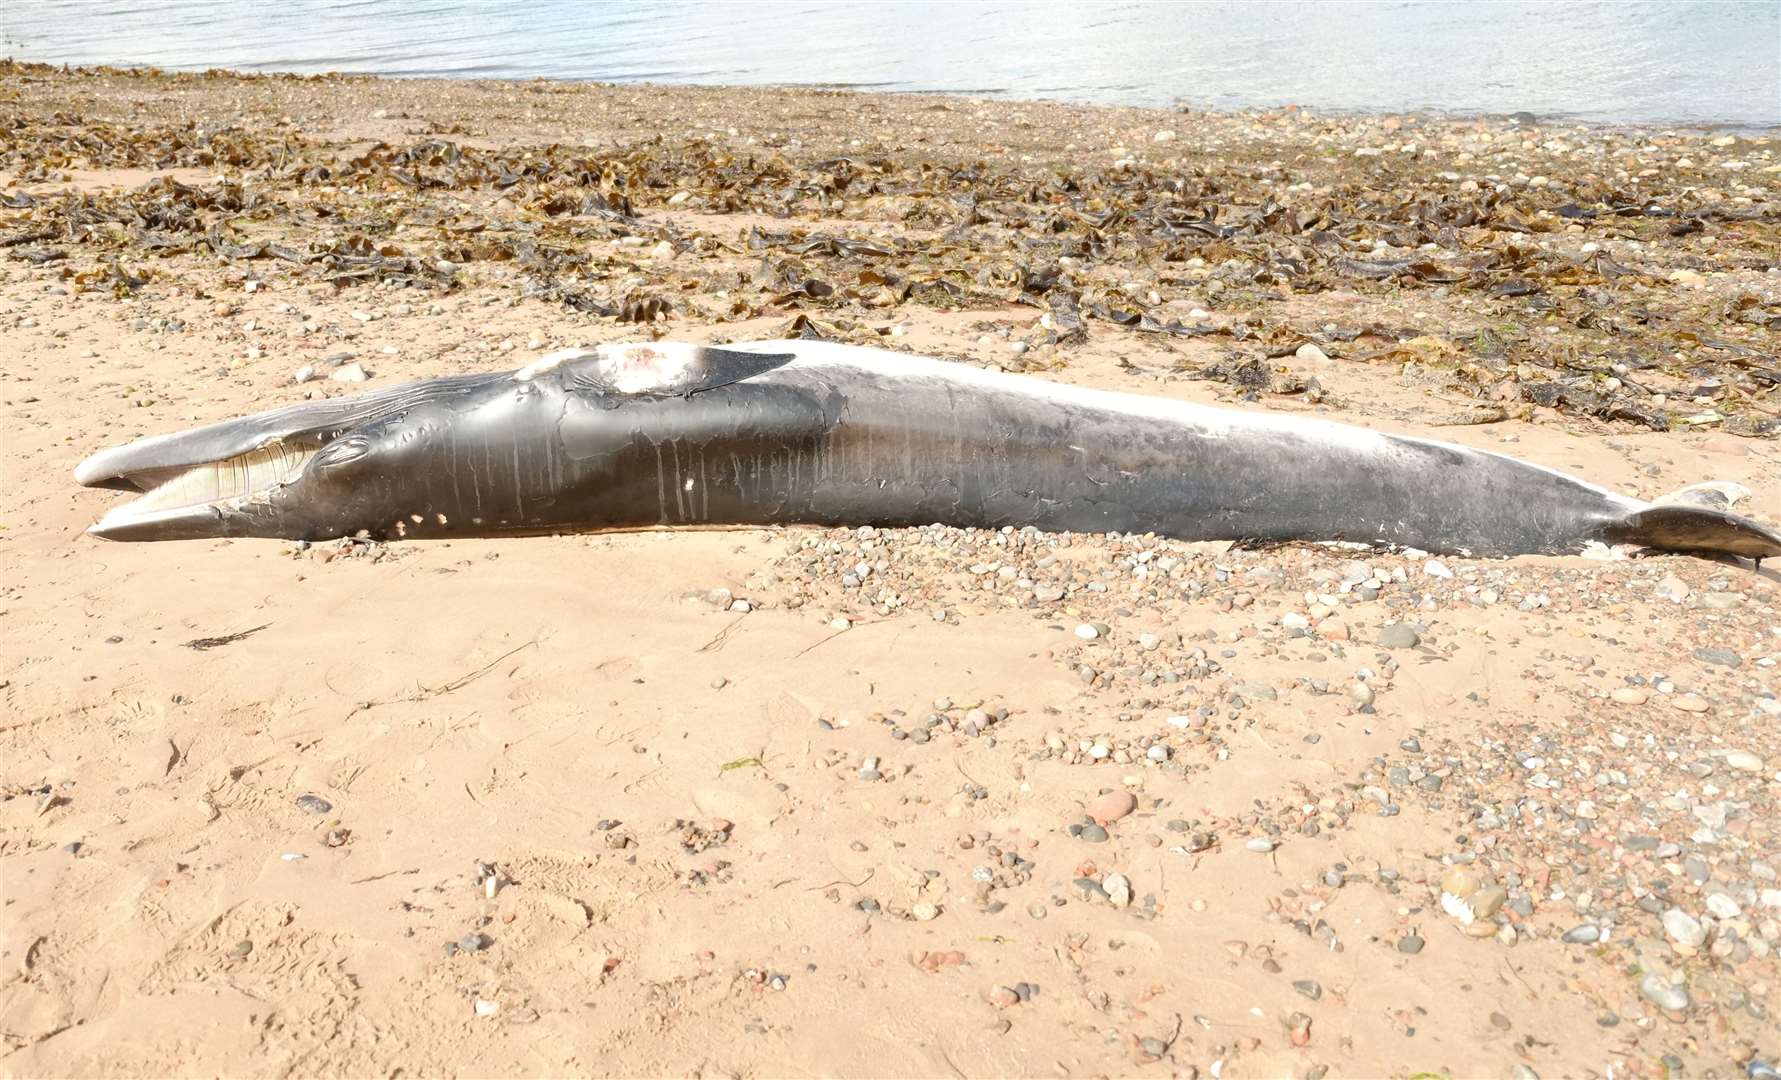 Minke whale washed up on Cromarty beach. Photo: Martin Cragg